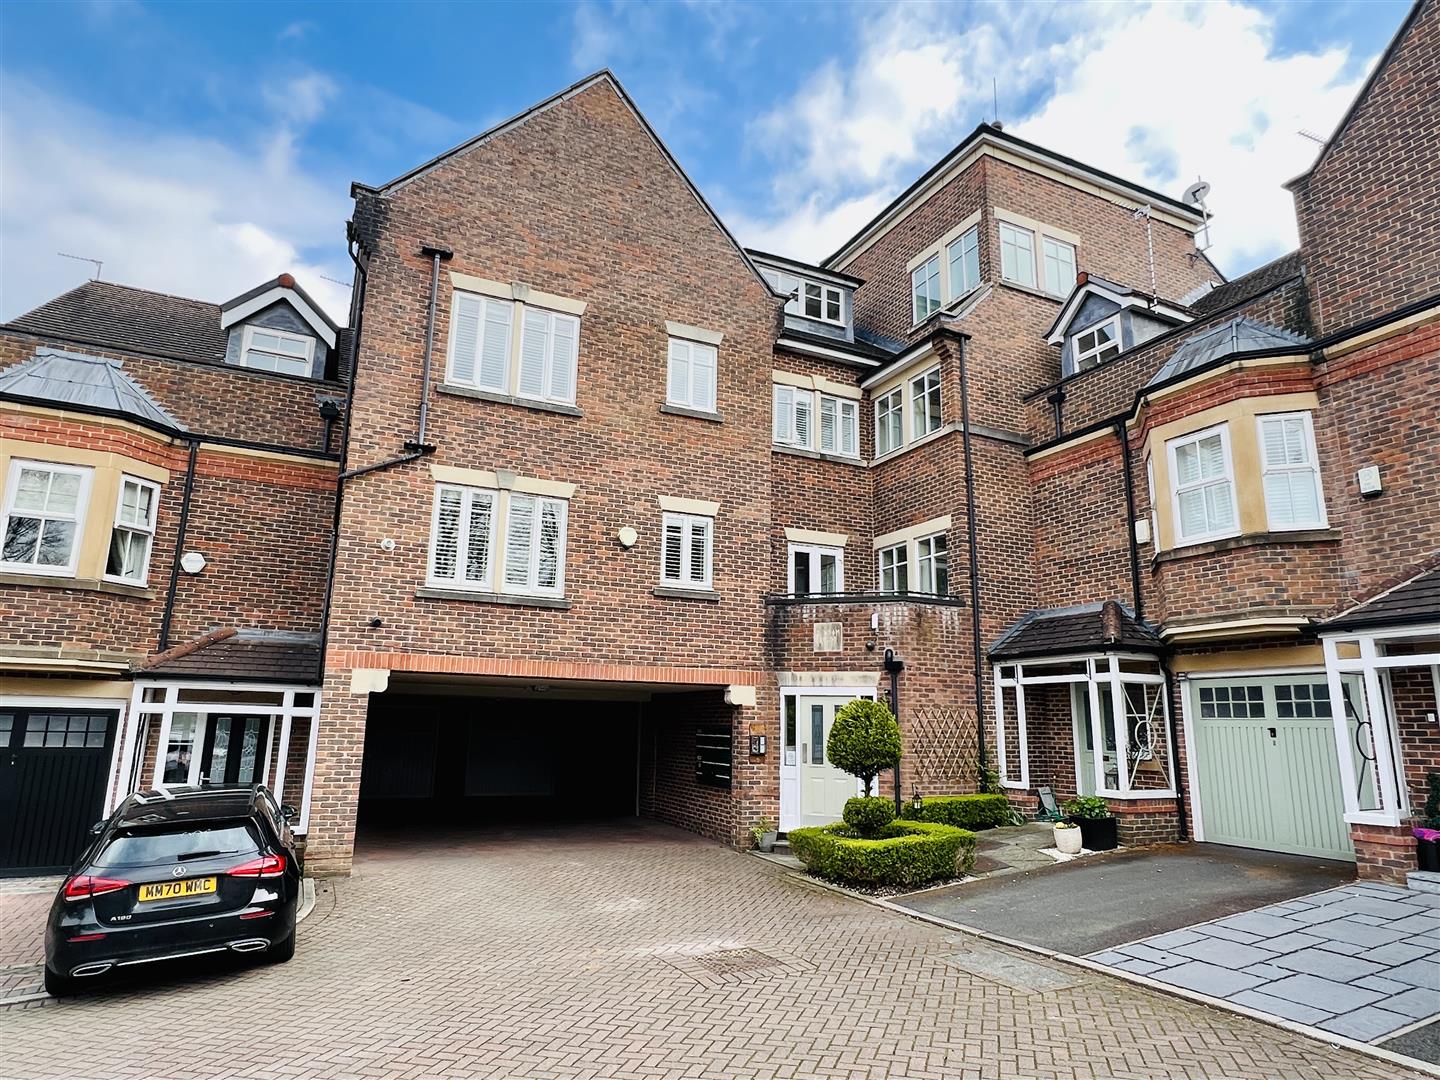 2 bed apartment for sale in Grove Lane, Altrincham  - Property Image 1